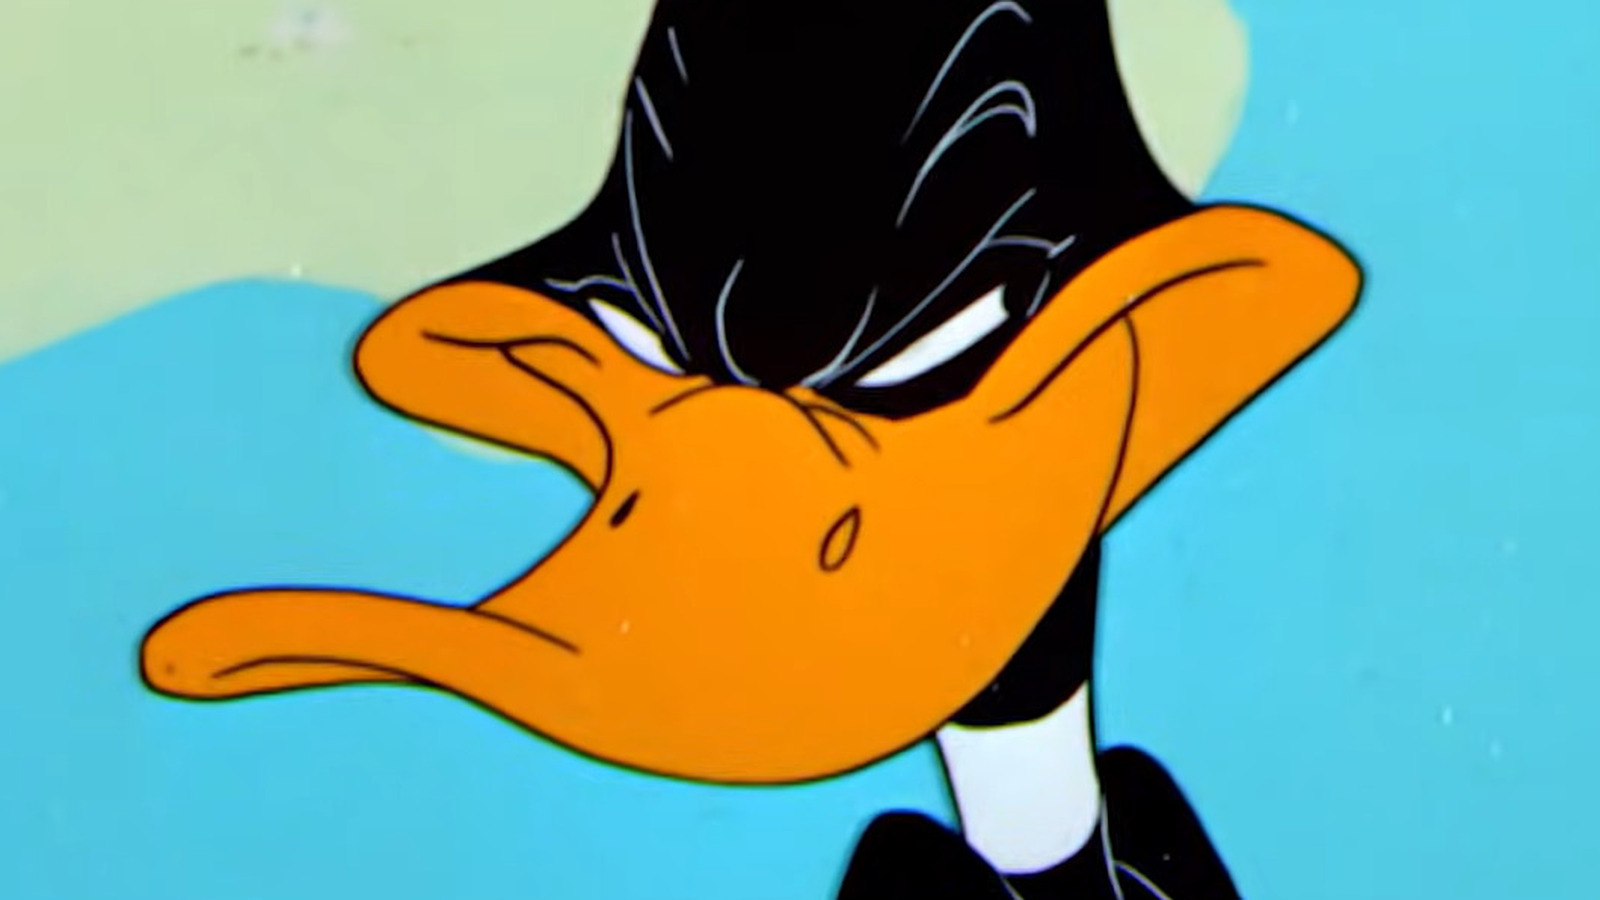 20 Most Popular Looney Tunes Characters Ranked Worst To Best